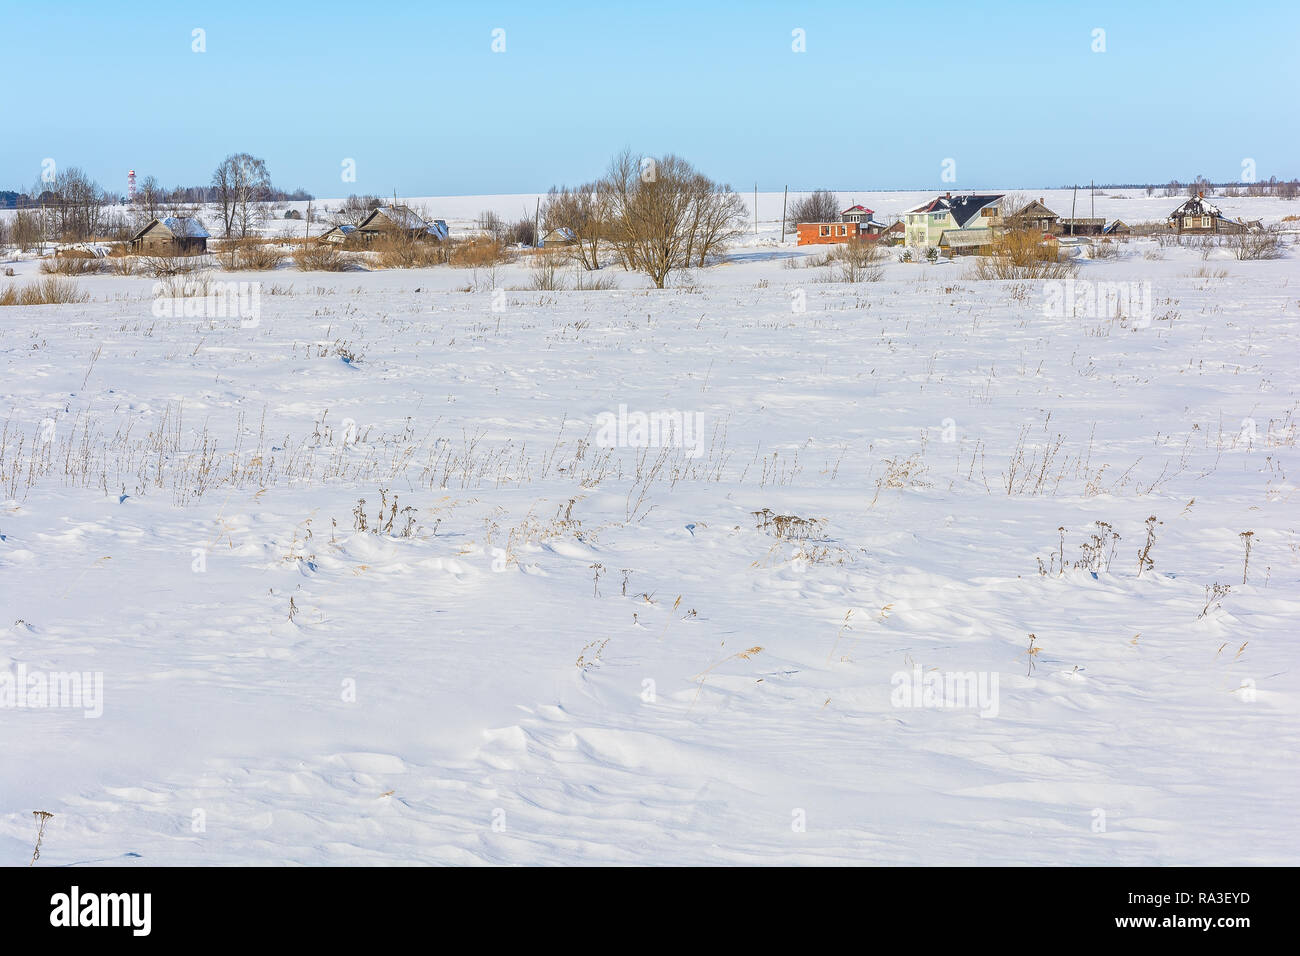 Snow-covered village near the field in winter Stock Photo